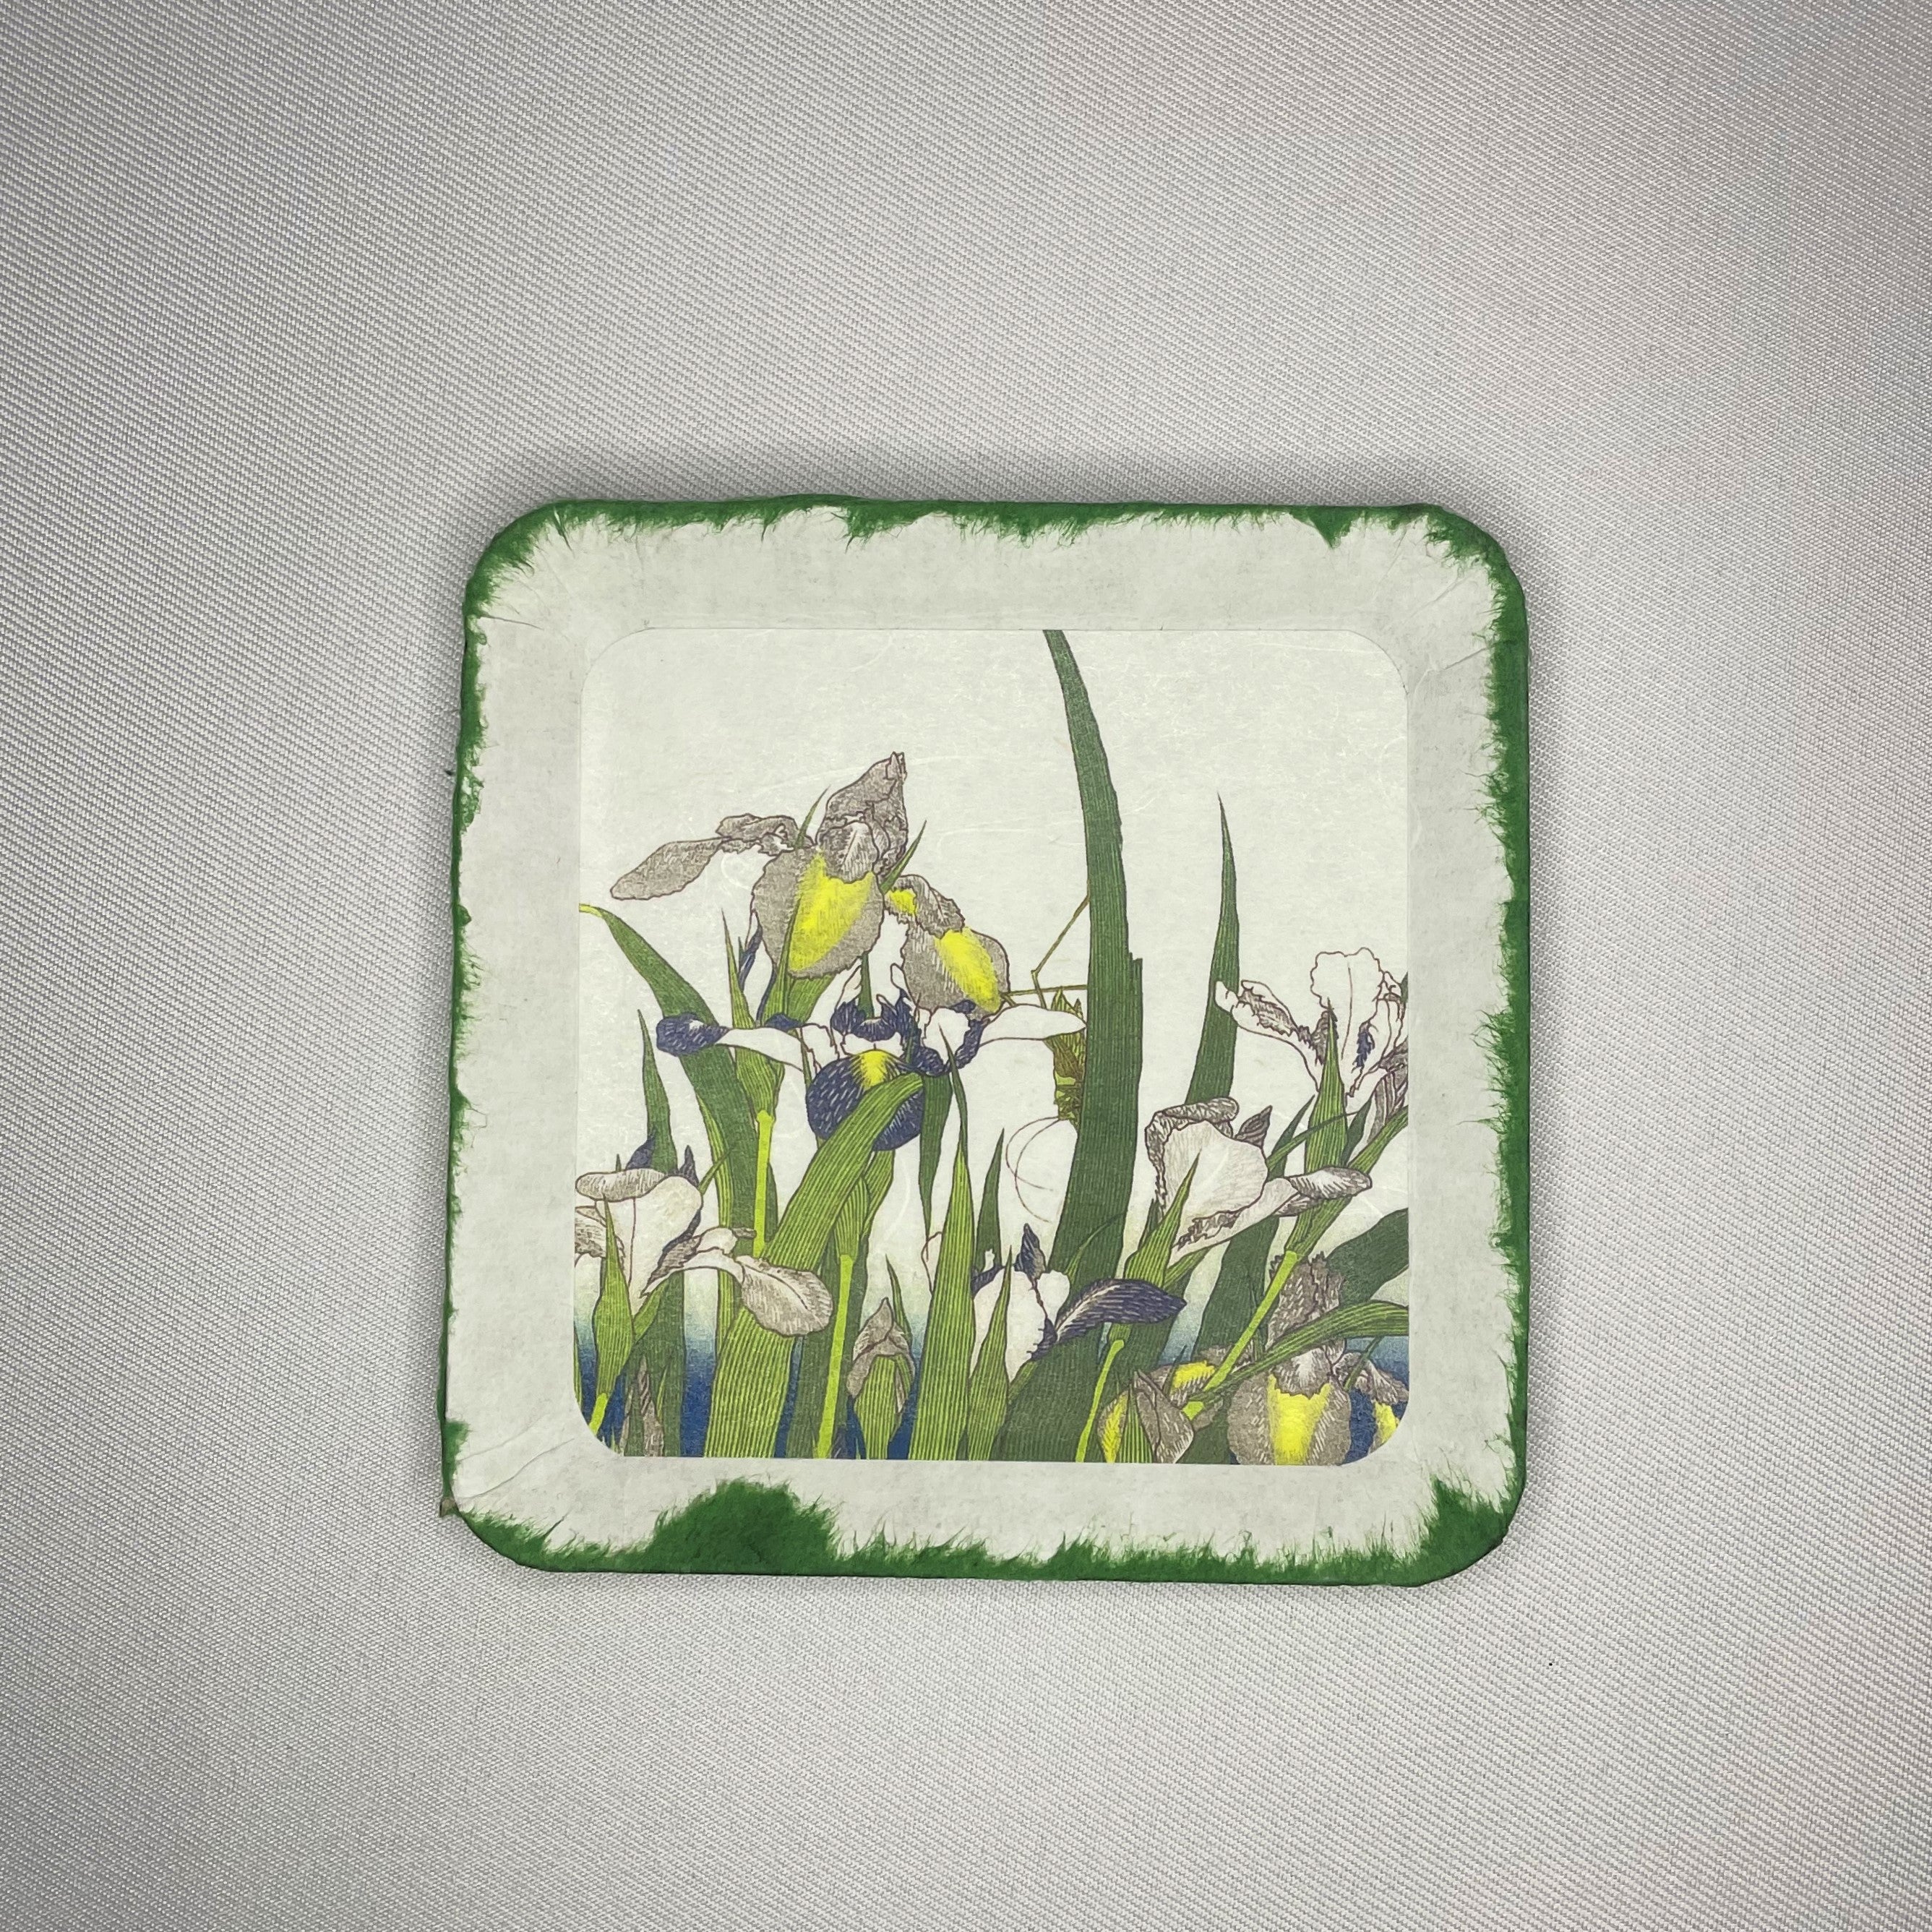 Traditional Design Small Plate